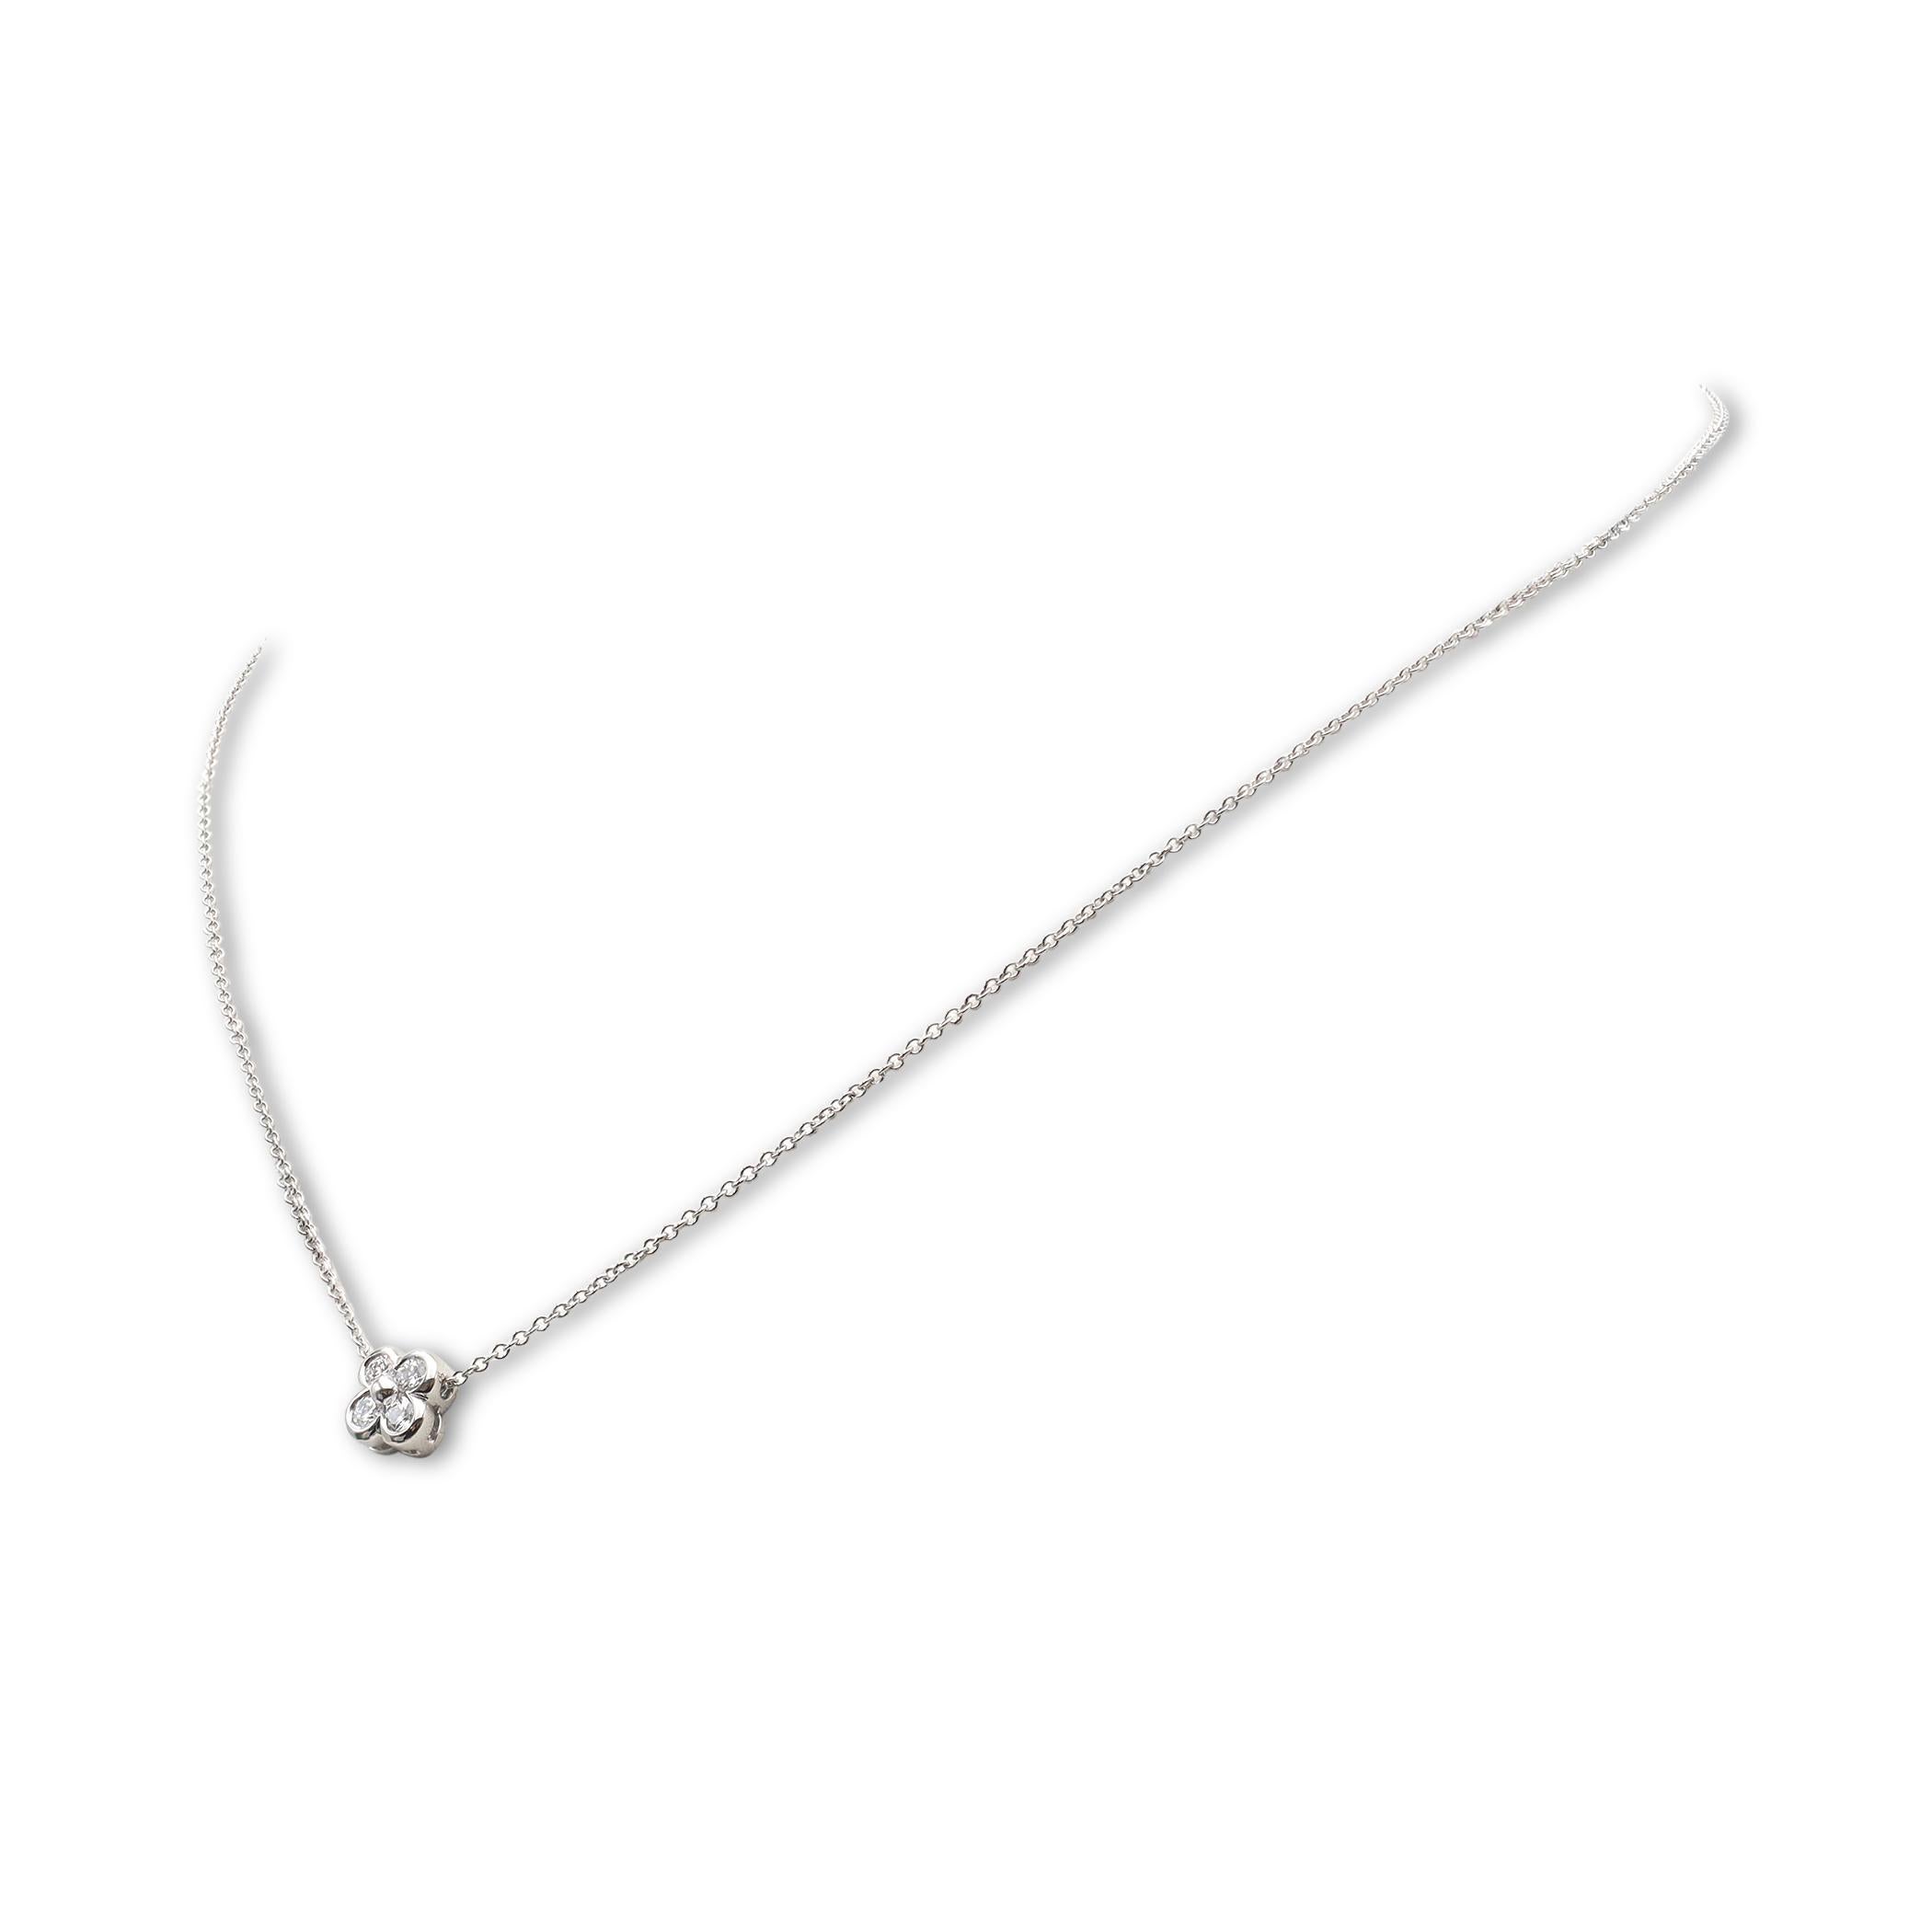 Authentic Tiffany & Co. necklace from the 'Enchant' collection crafted in platinum and featuring a flower pendant set with 4 glittering round brilliant diamonds for an estimated 0.28 carats total weight.  The pendant hangs from a delicate 16-inch